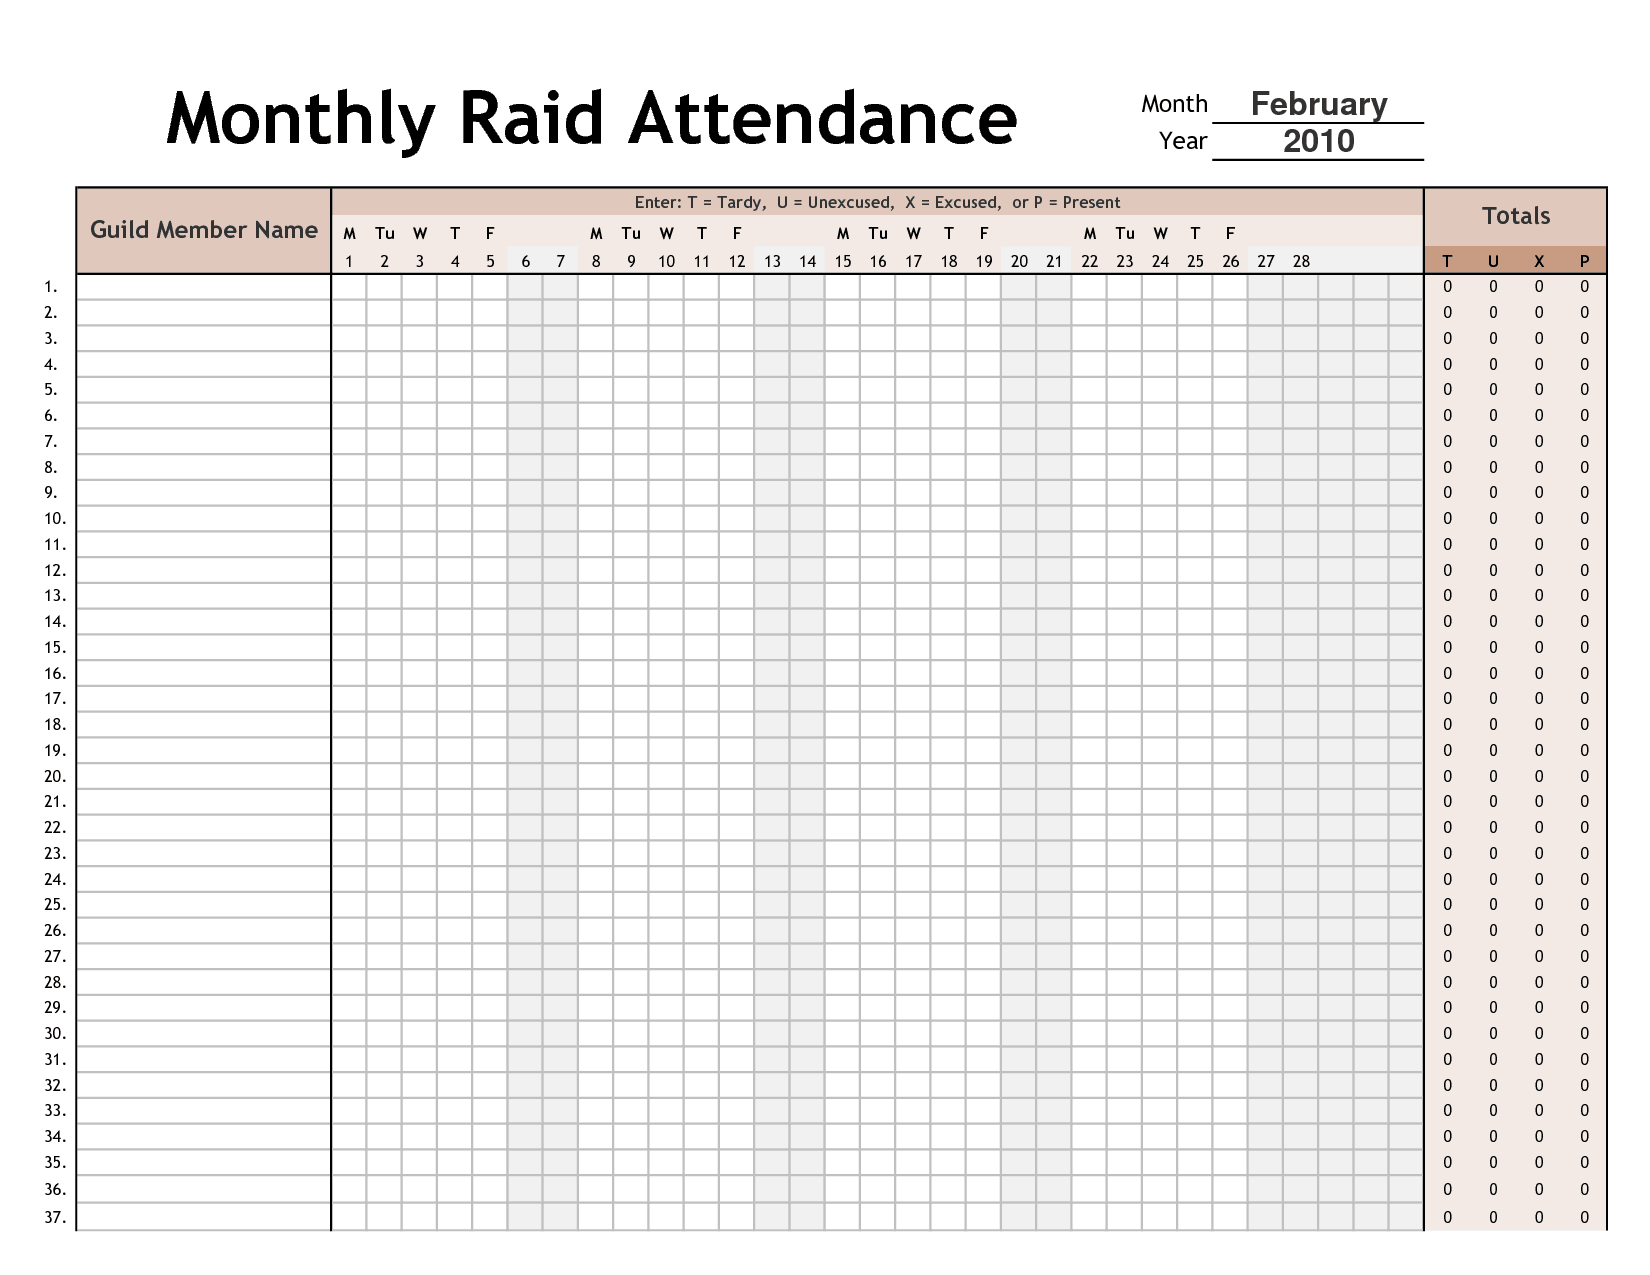 student attendance sheet in excel parent contact template